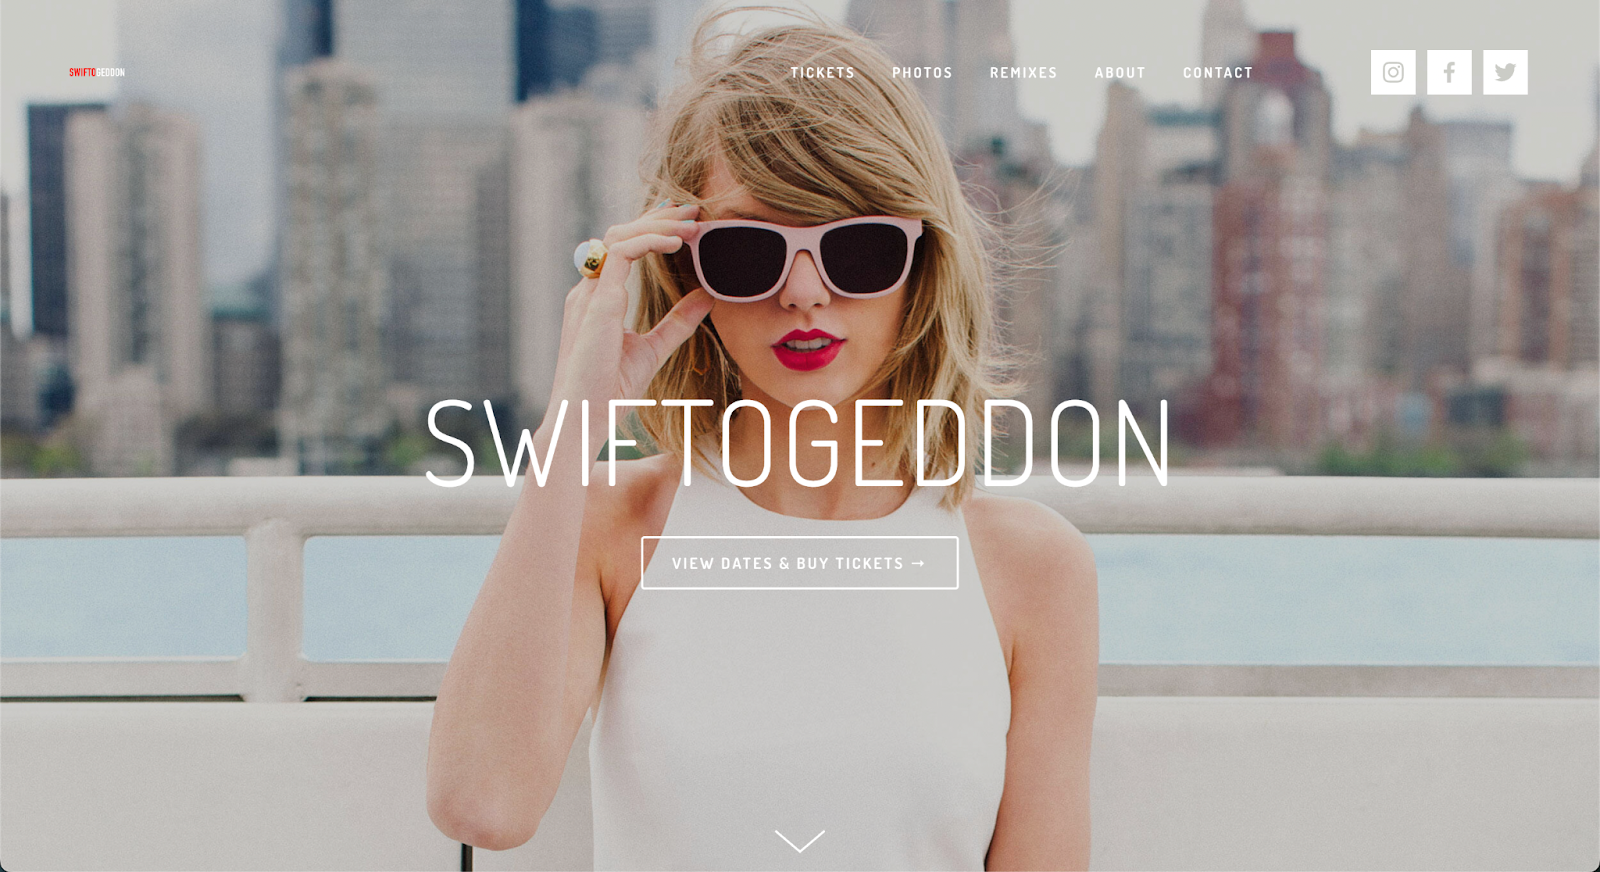 event website examples, switogeddon